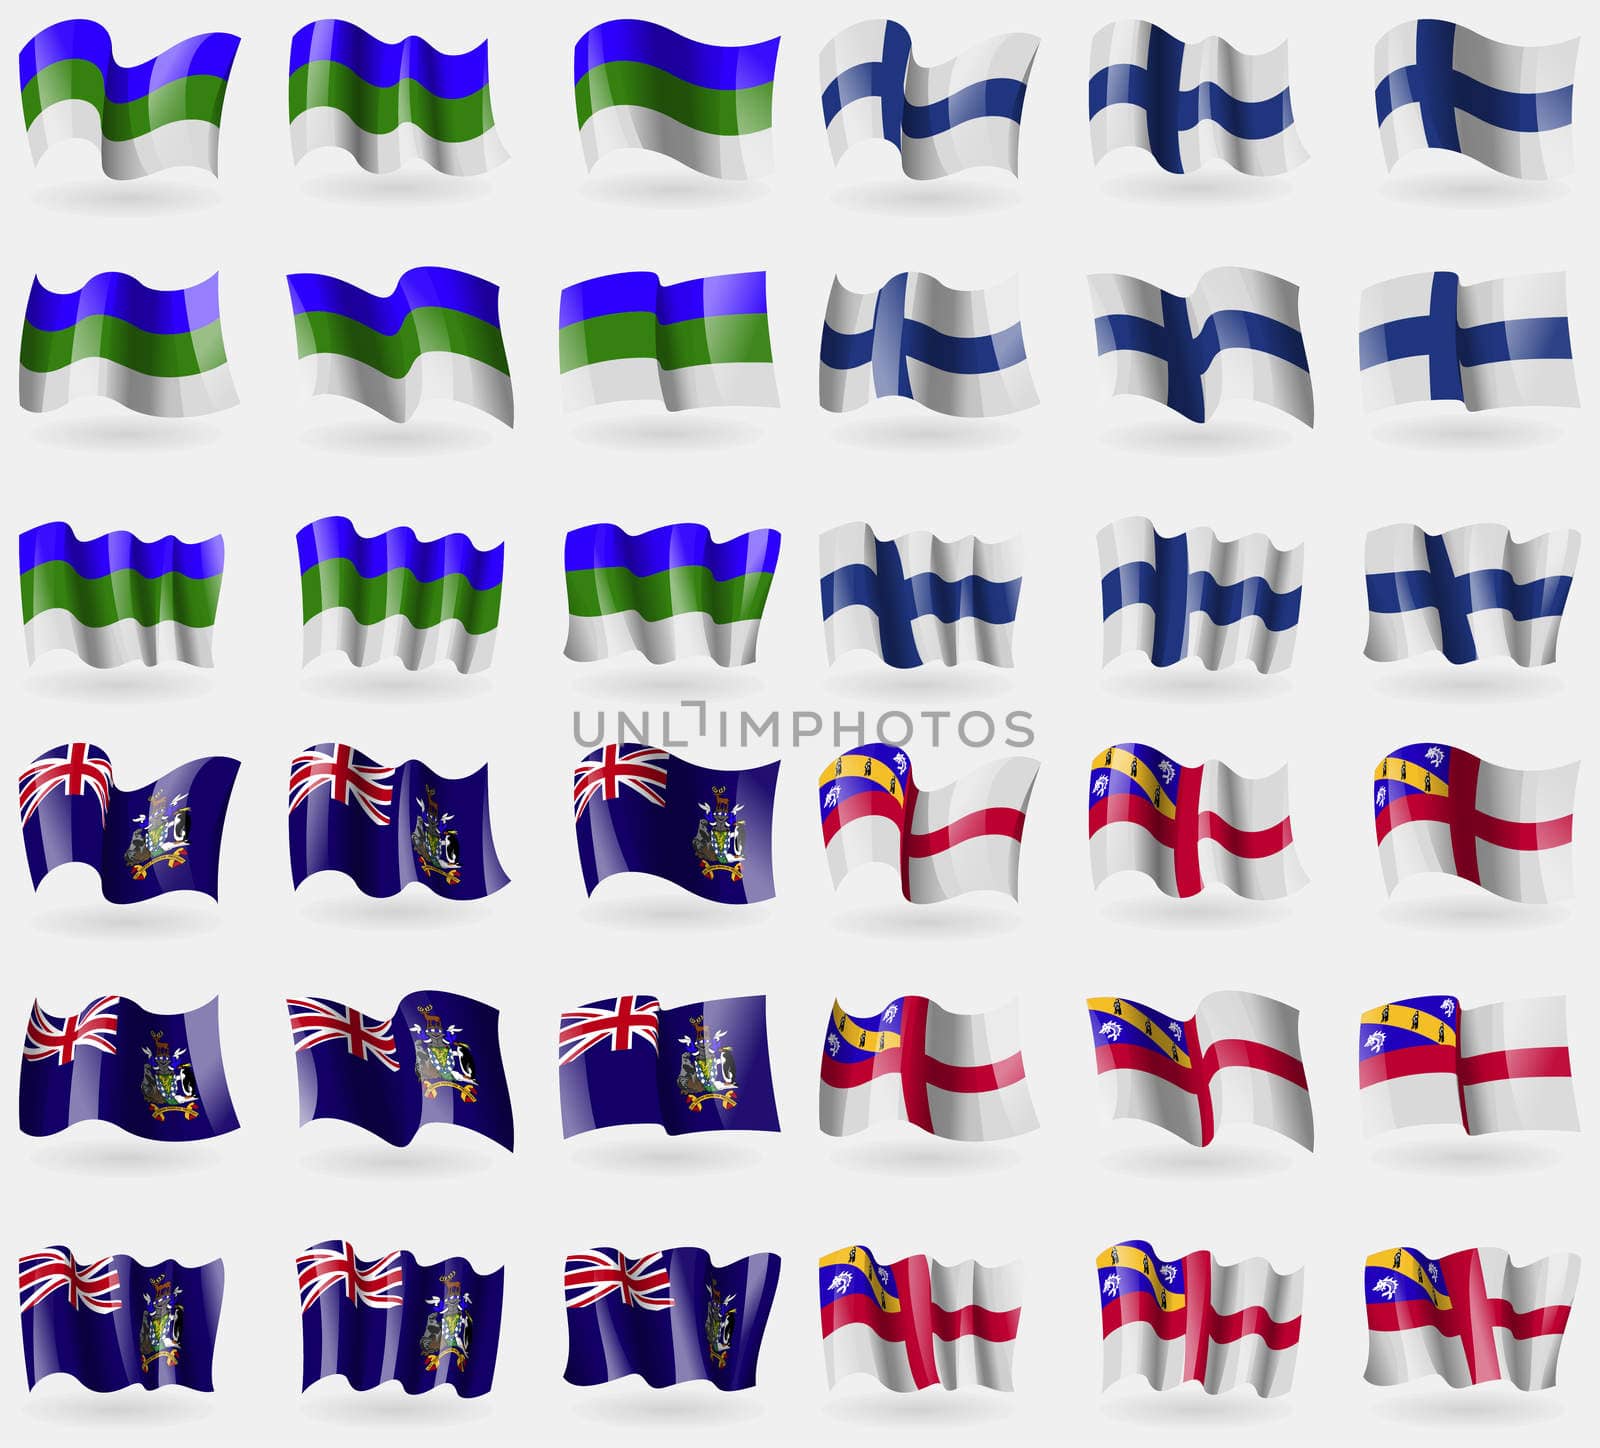 Komi, Finland, Georgia and Sandwich, Herm. Set of 36 flags of the countries of the world. illustration